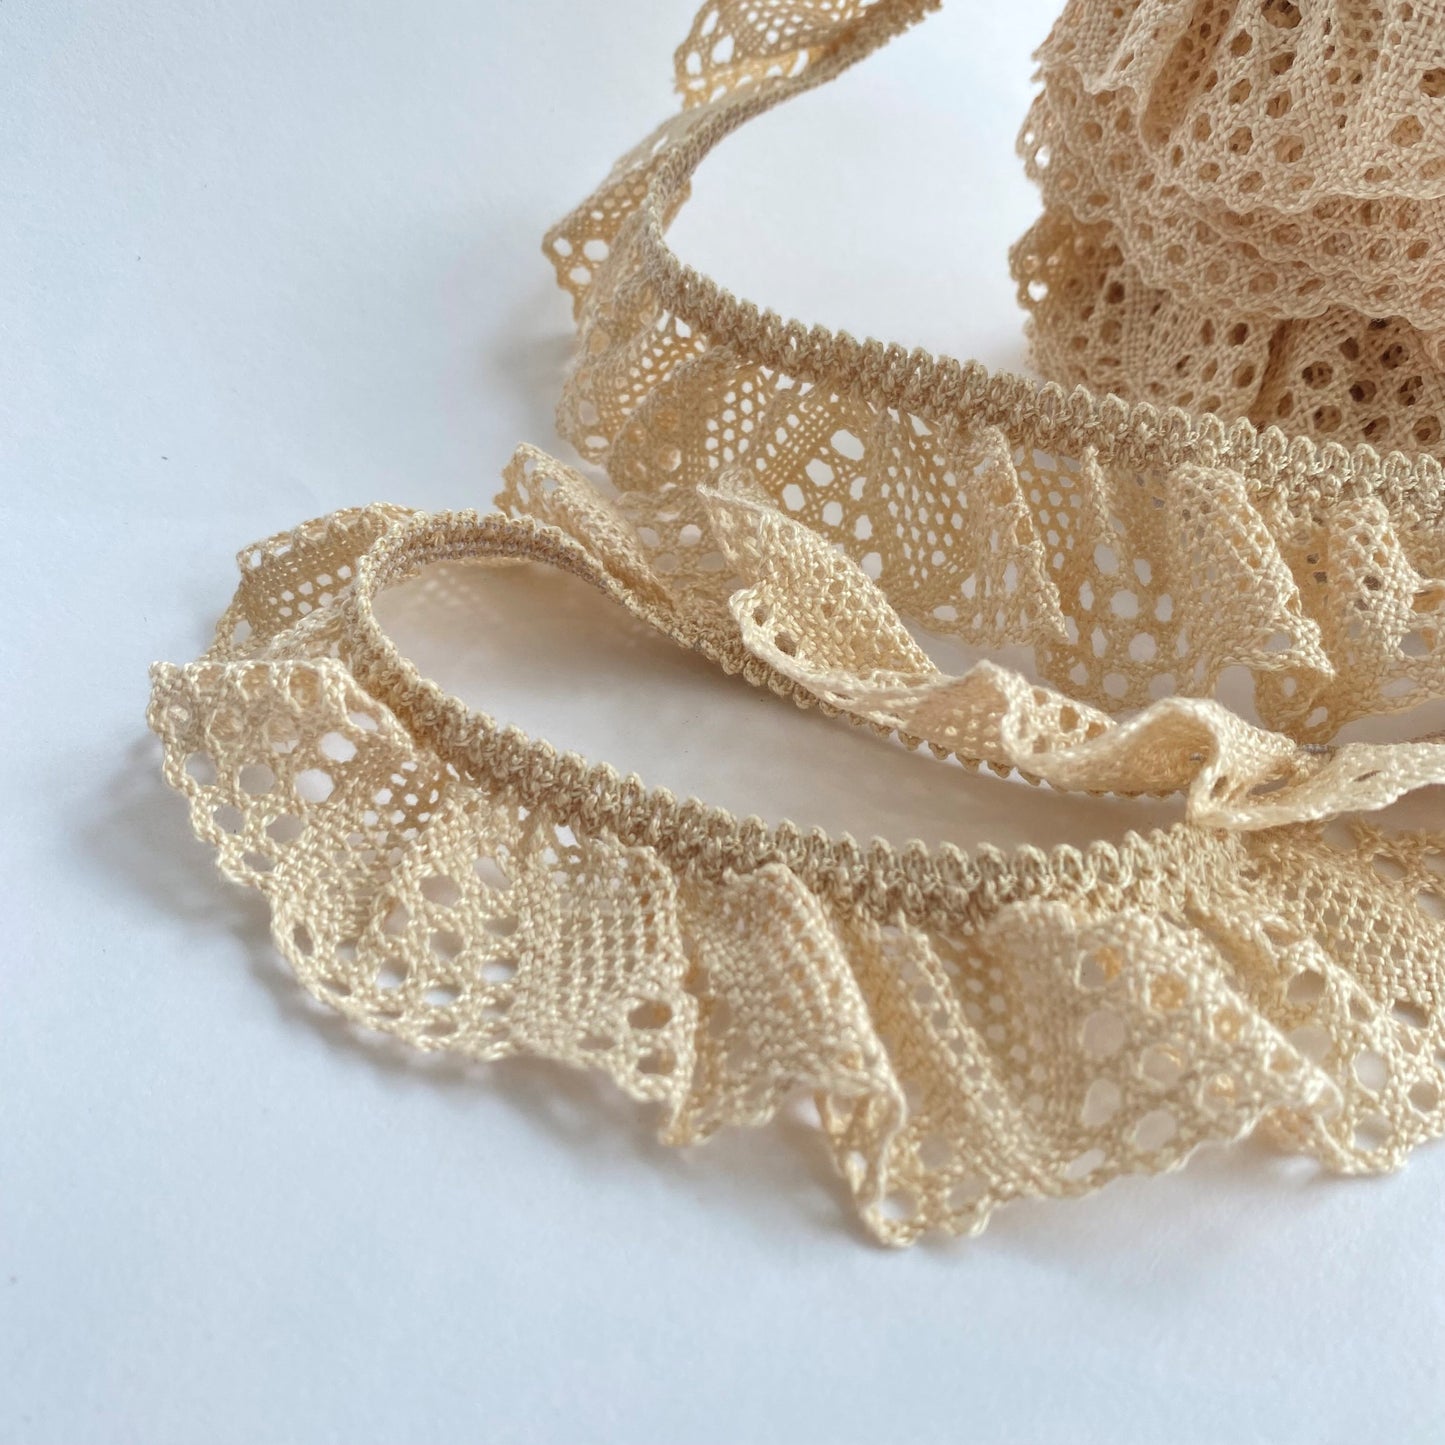 40mm wide Ruffled Cluny, macramé, crochet lace trim with a stretchy edge. This lace is eco friendly as the cotton is Oeko Tex 'Made in Green' standard.